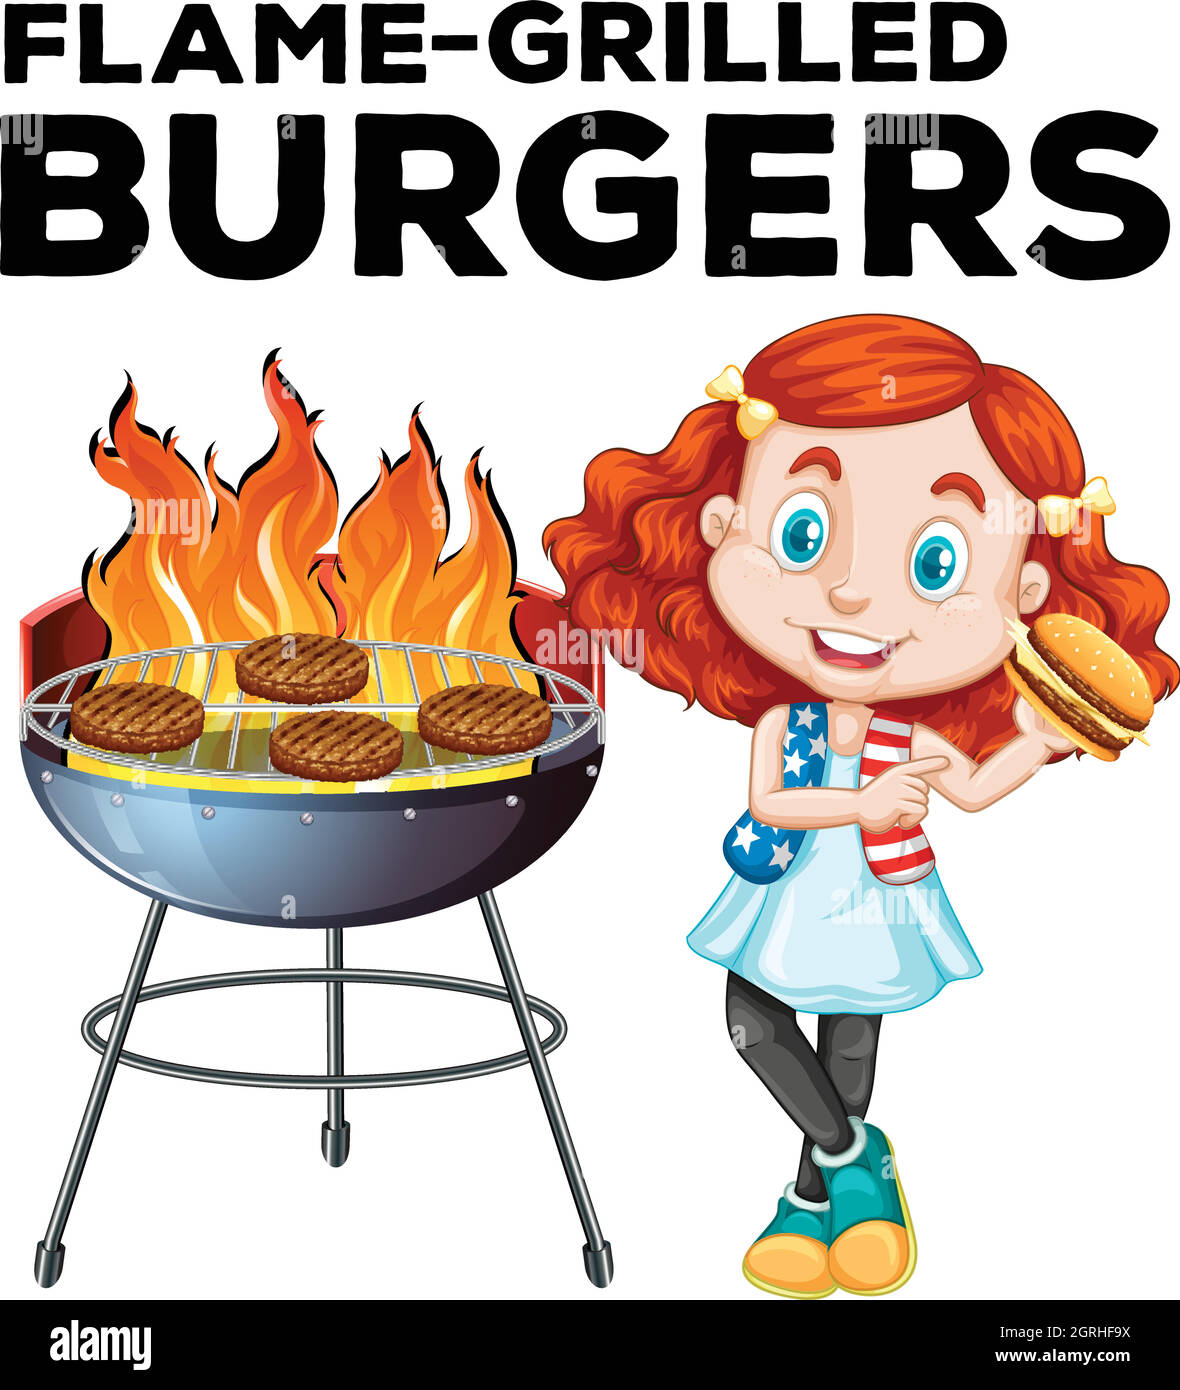 Girl and flame-grilled burgers Stock Vector